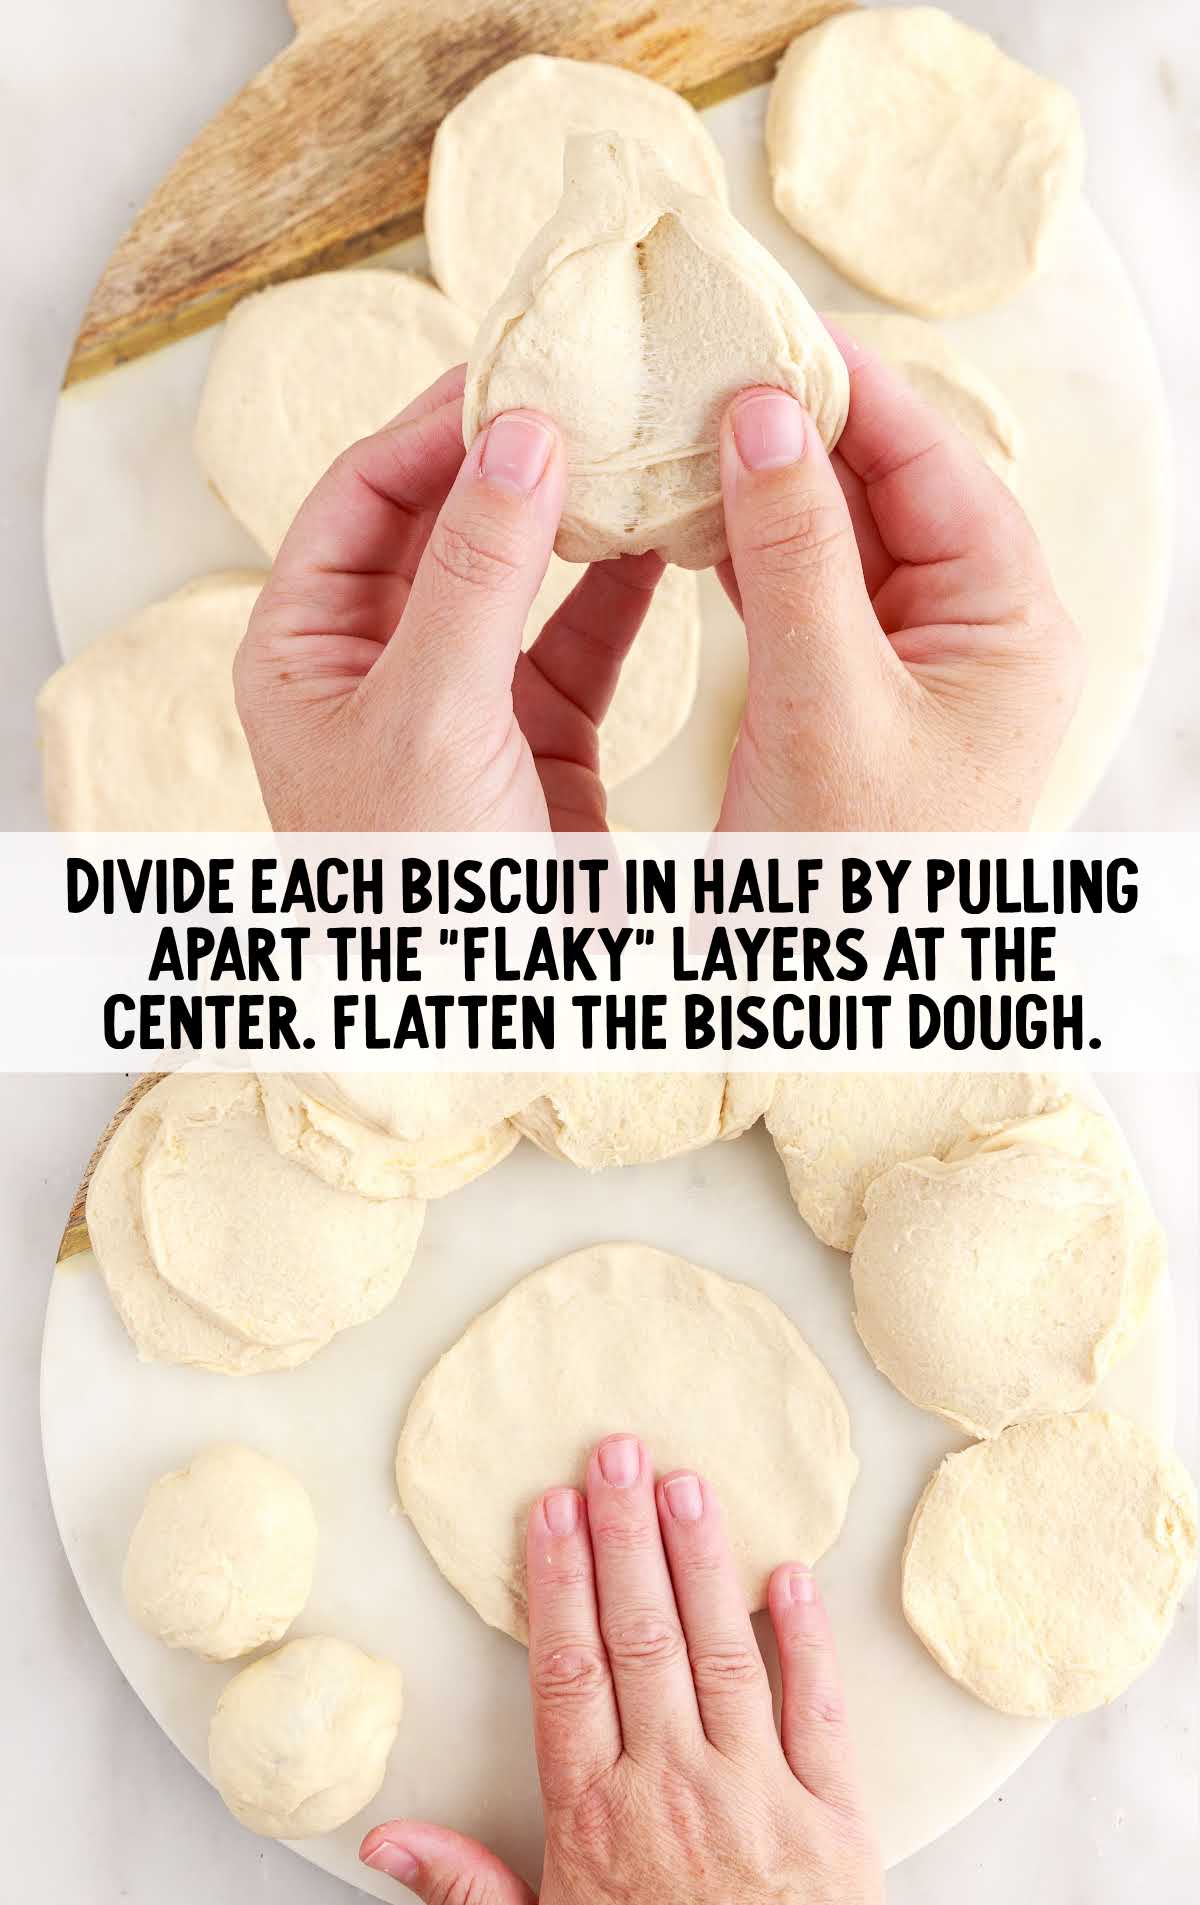 biscuit dough pulled apart